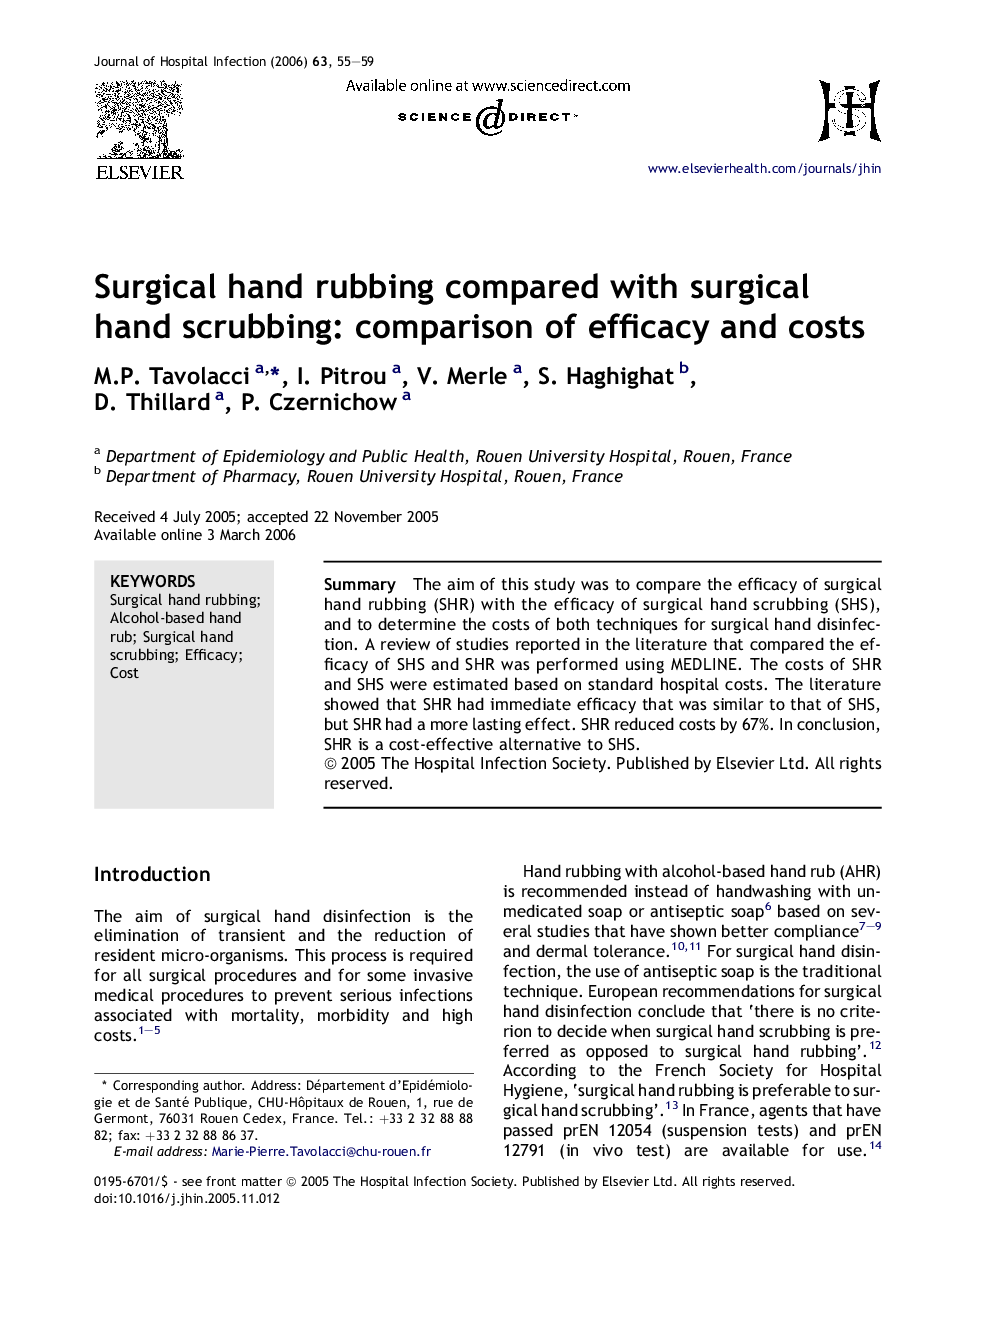 Surgical hand rubbing compared with surgical hand scrubbing: comparison of efficacy and costs